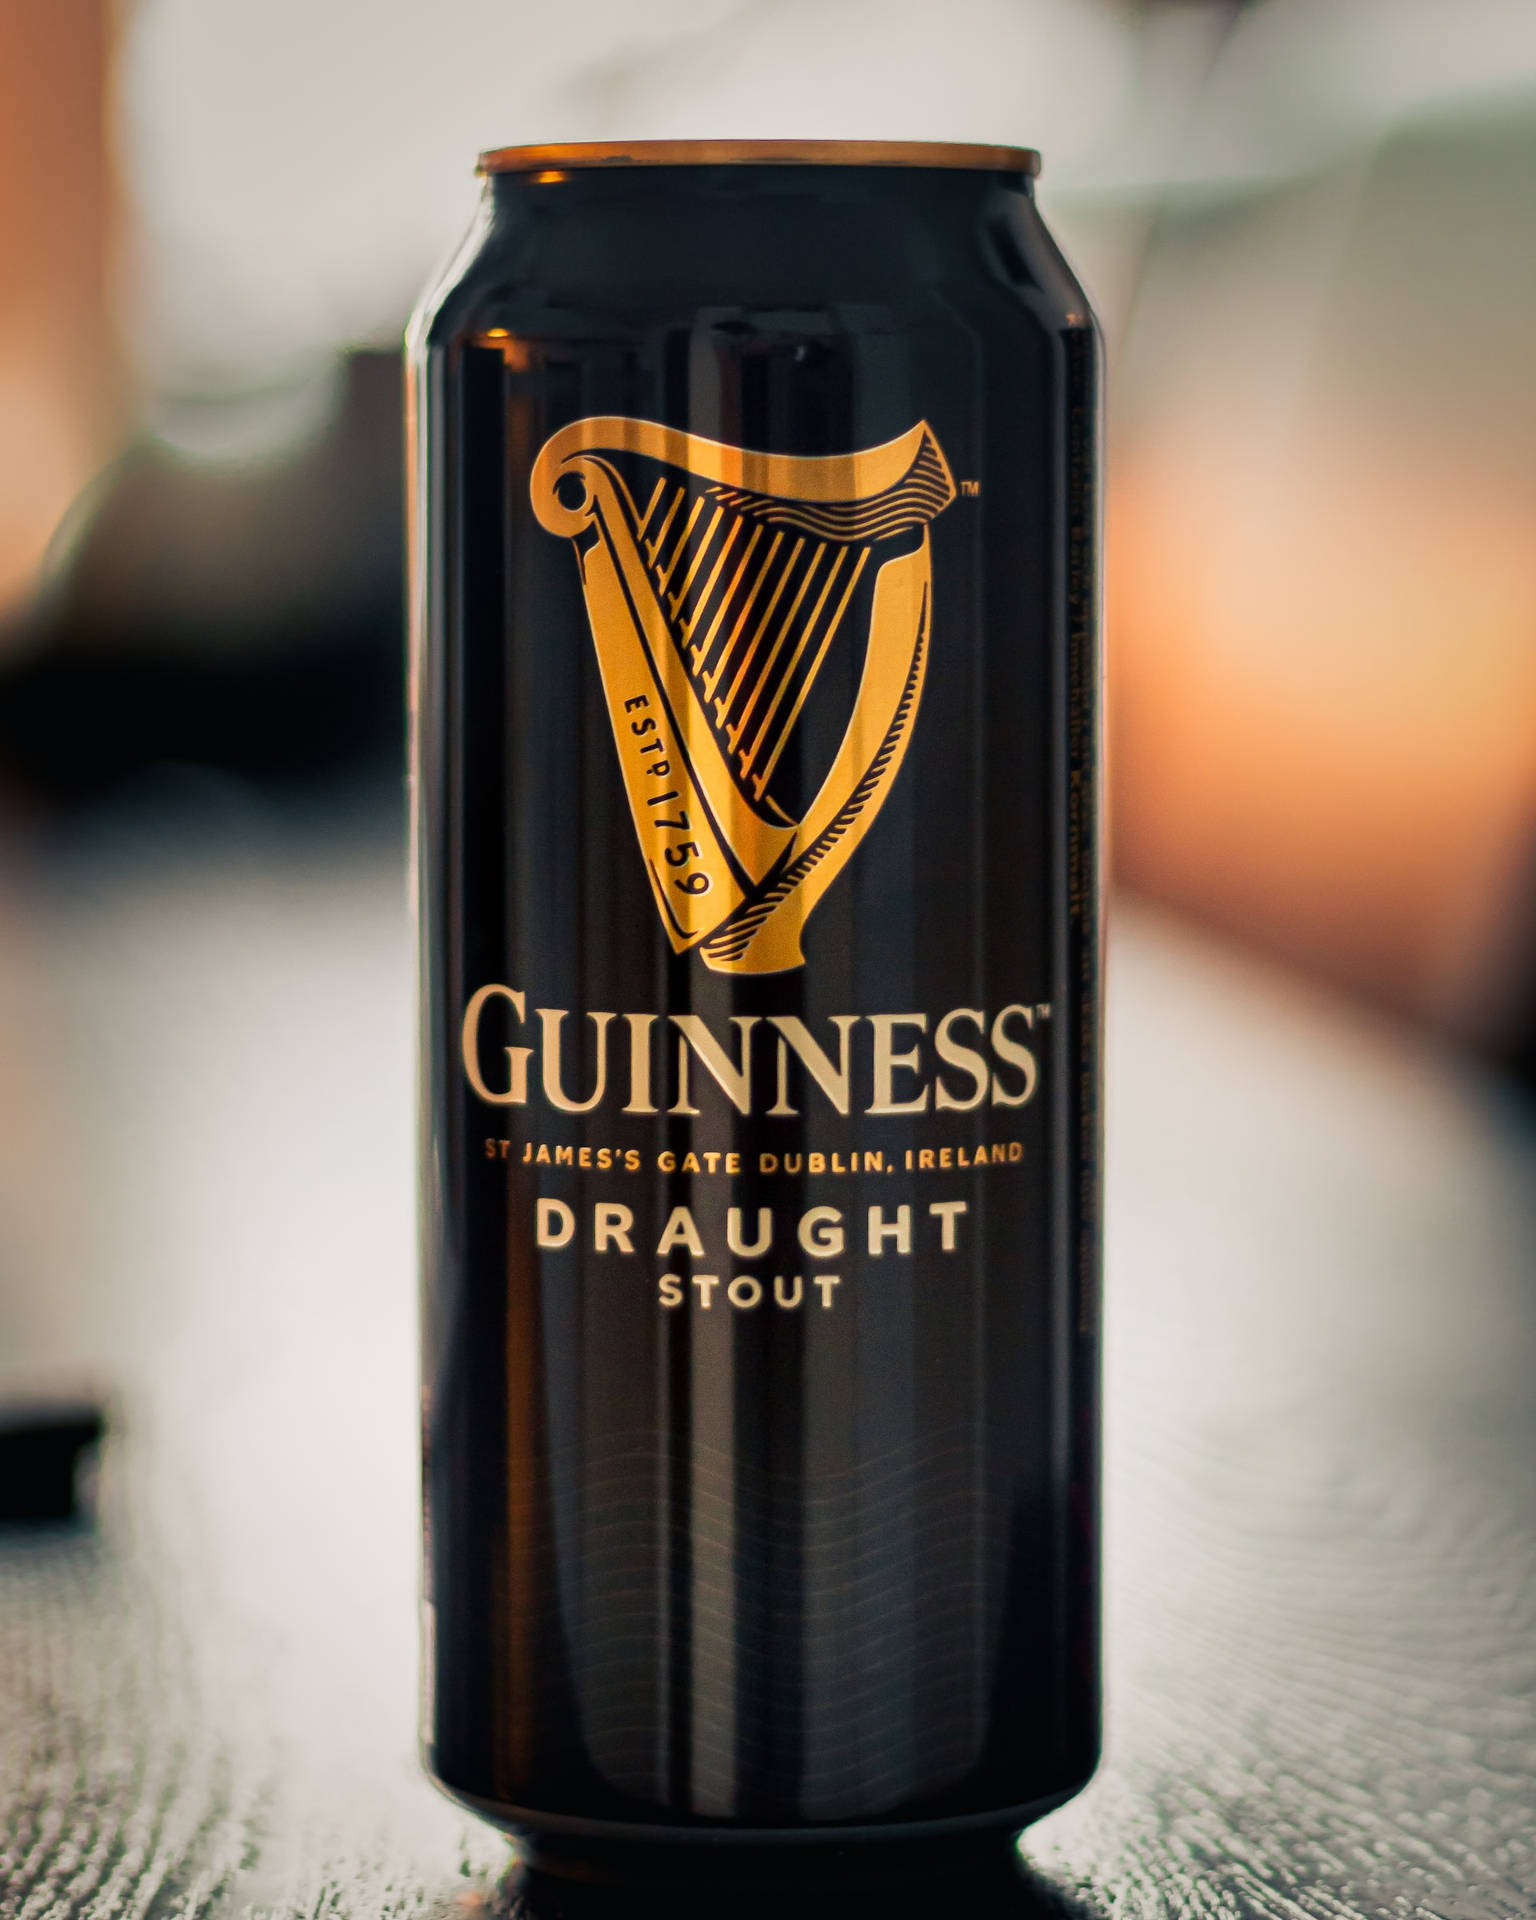 Irish Dry Stout Guinness In Can Wallpaper